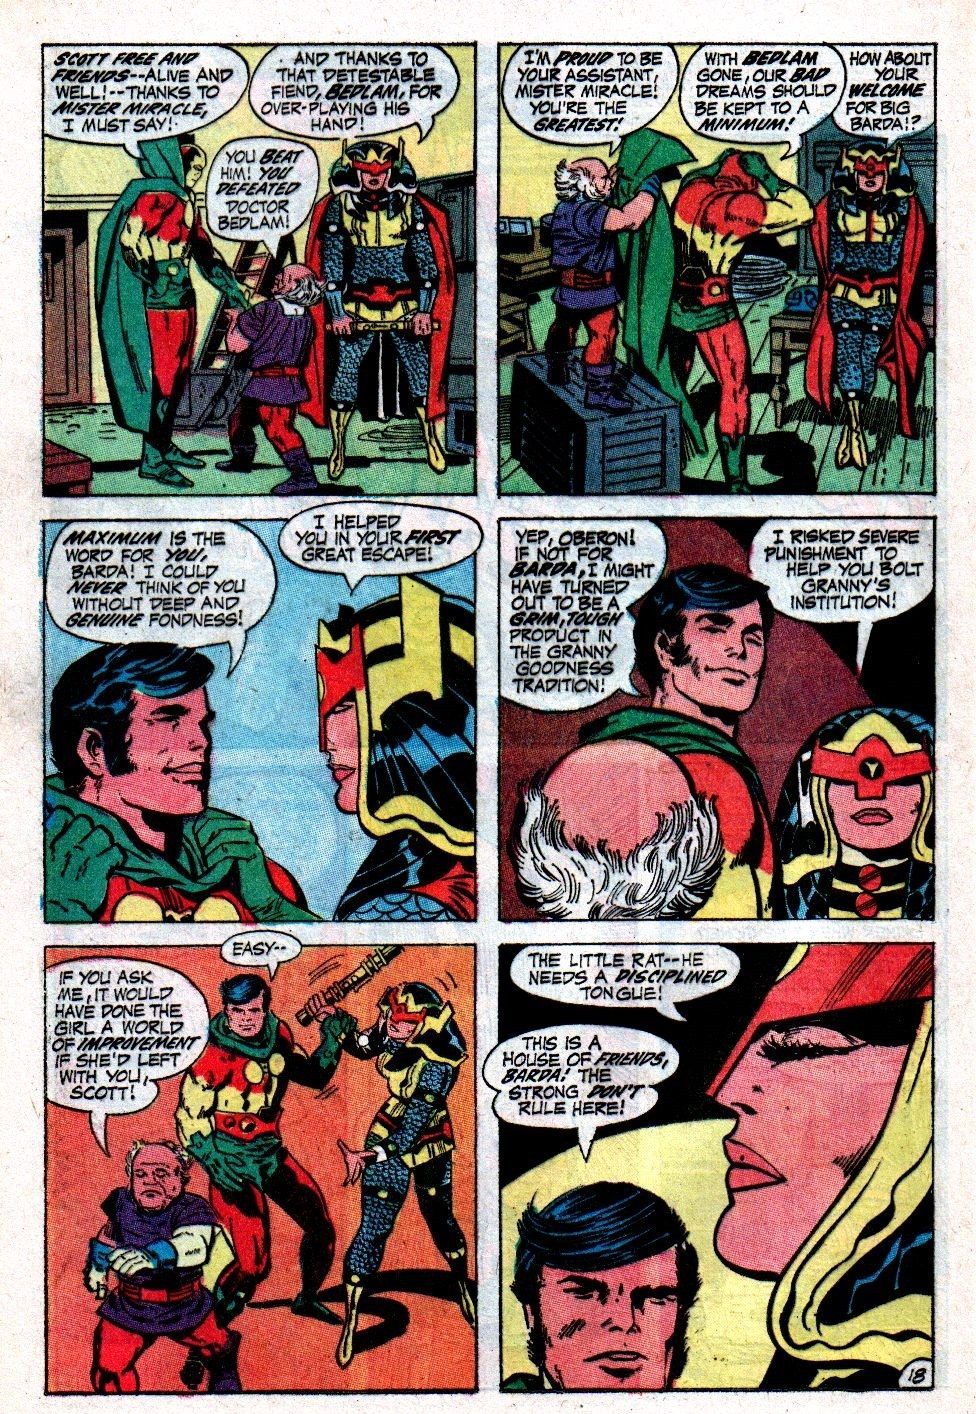 Was Big Barda Originally Not Going to be Part of the New Gods?